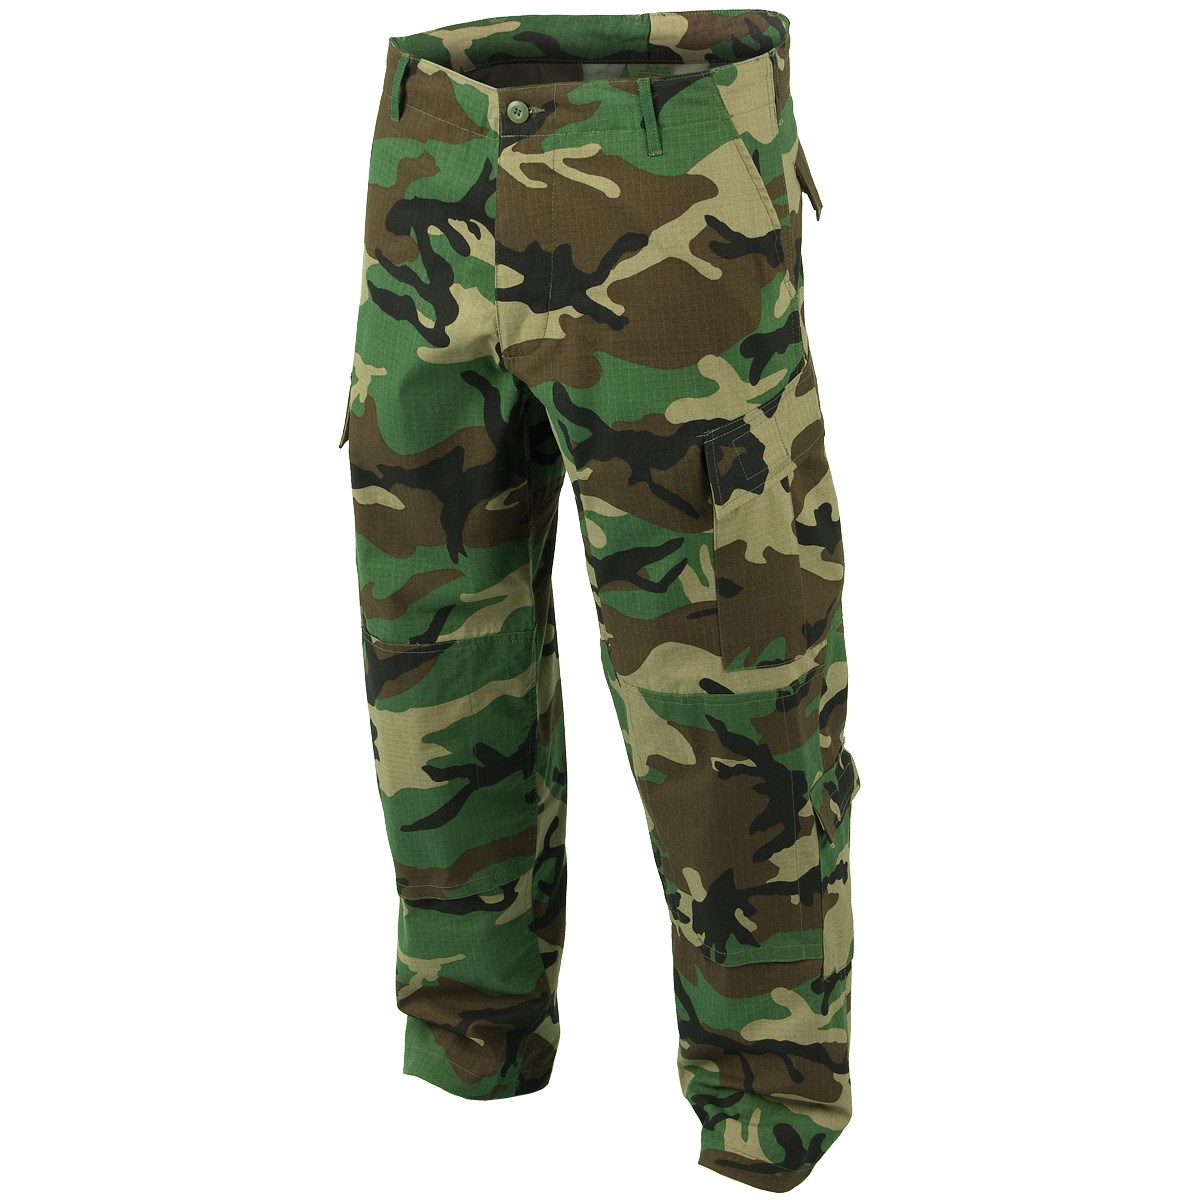 Mens Army Combat Cargo Camouflage Camo Work Trousers Pants Military uk New  | eBay